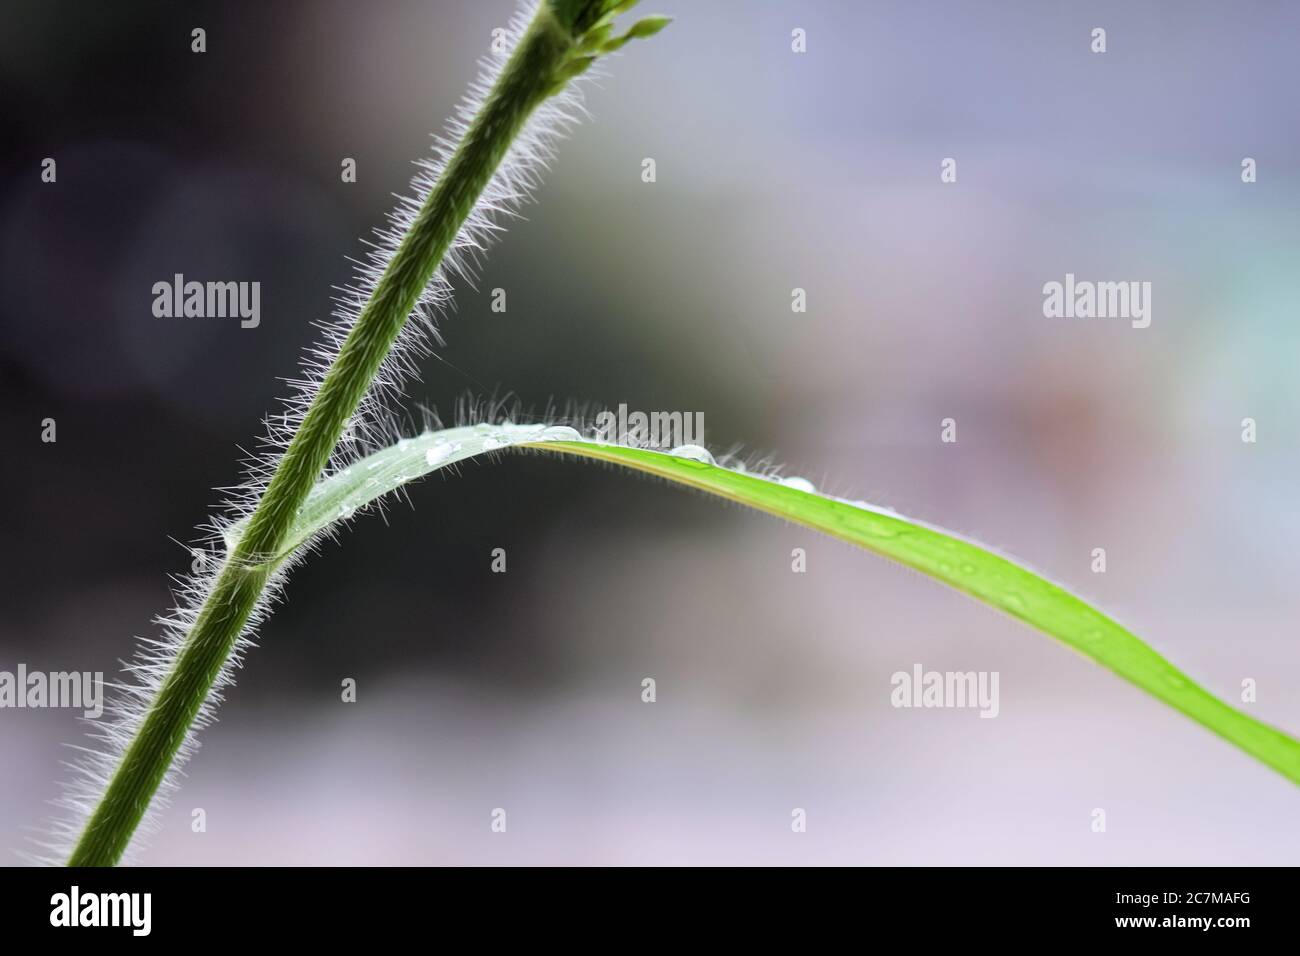 Closeup shot of a hairy stem with droplets of water on the leaf with a blurred background Stock Photo